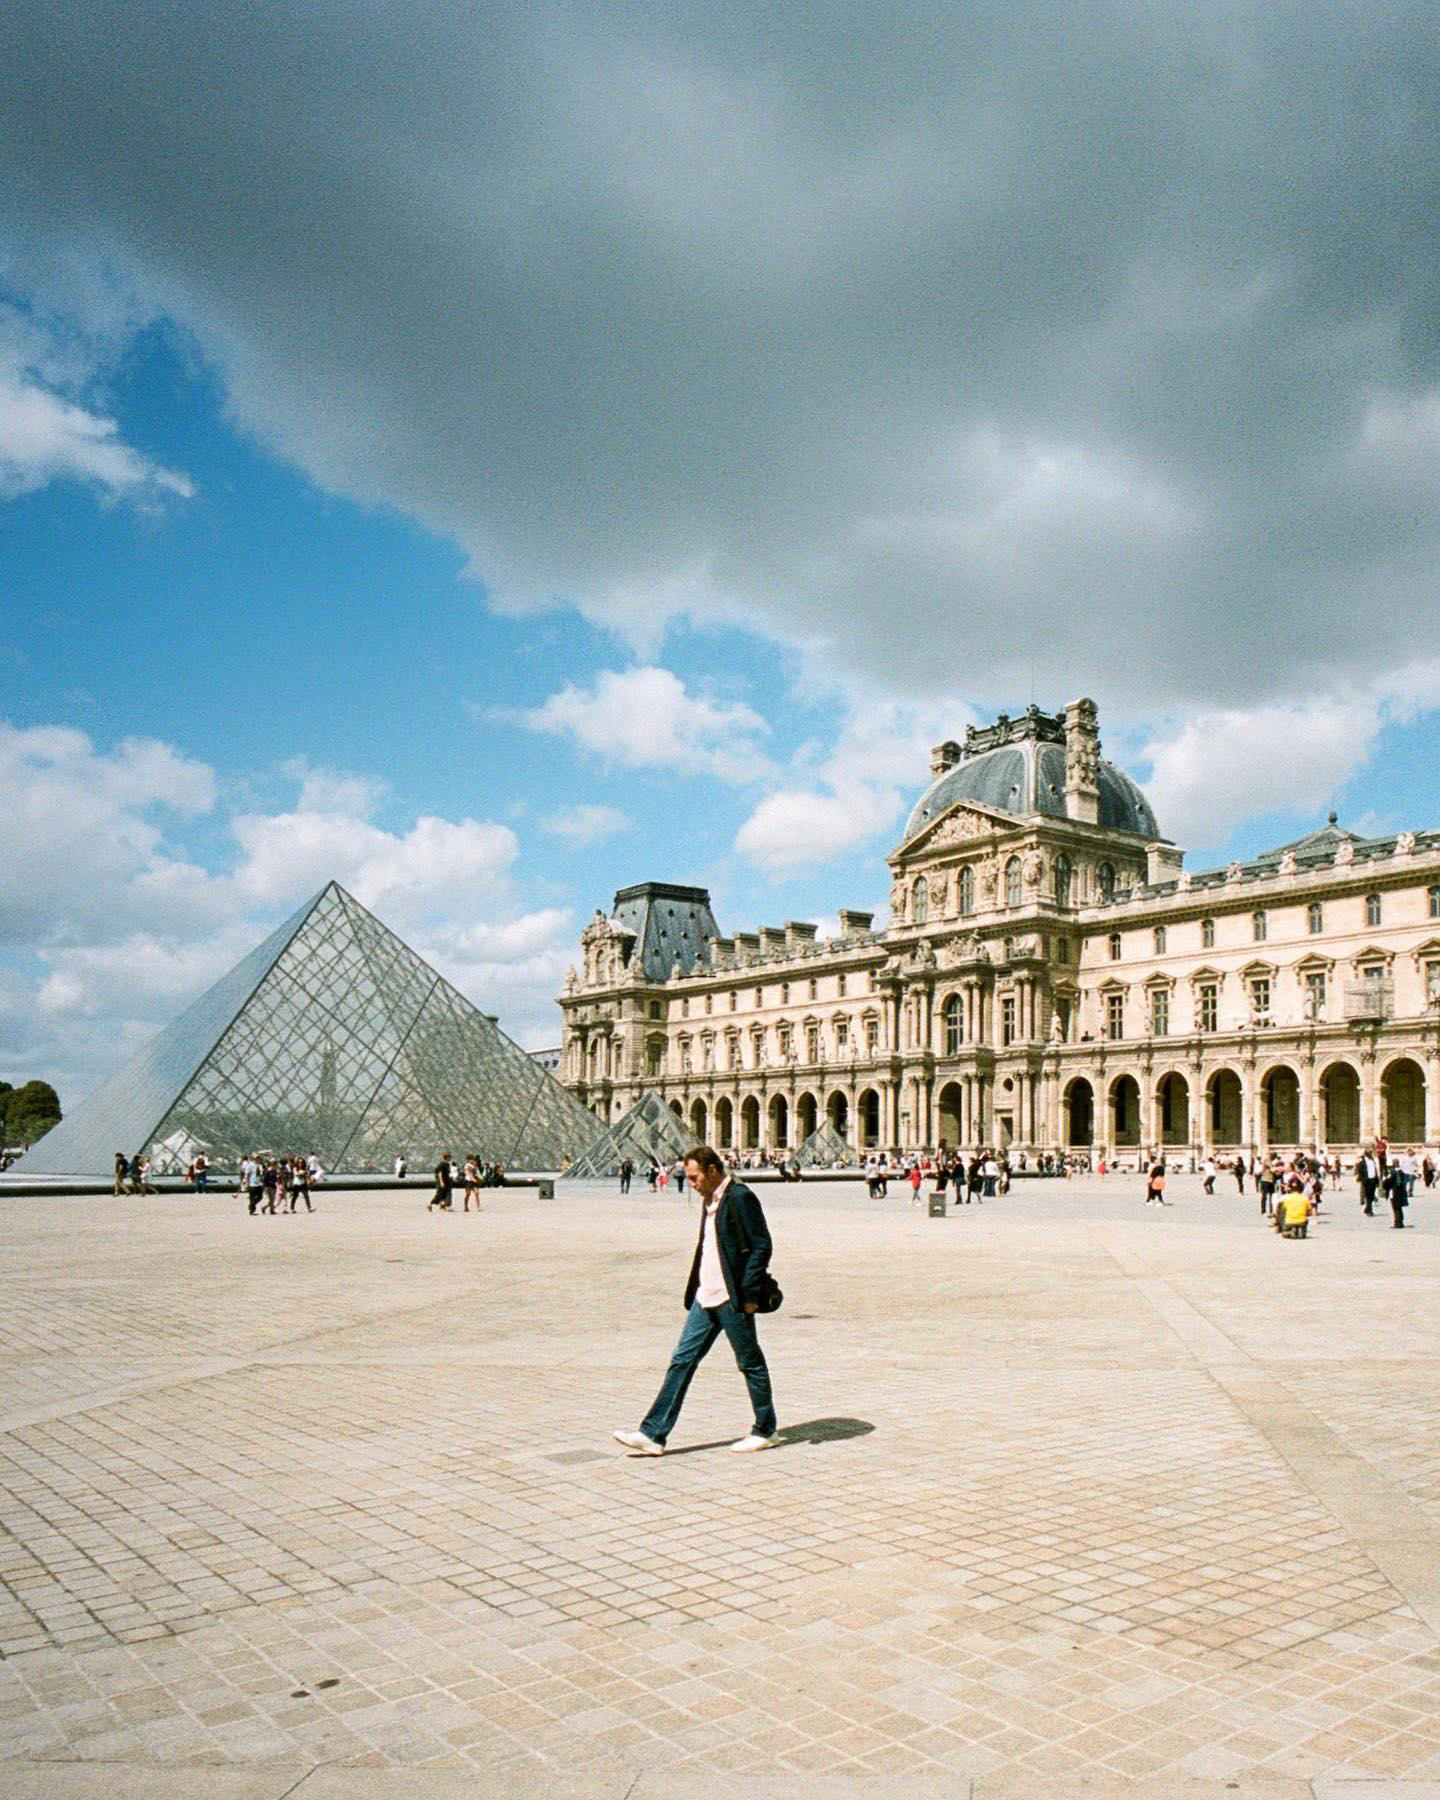 image  1 Paris - This one is even older, made with an older camera